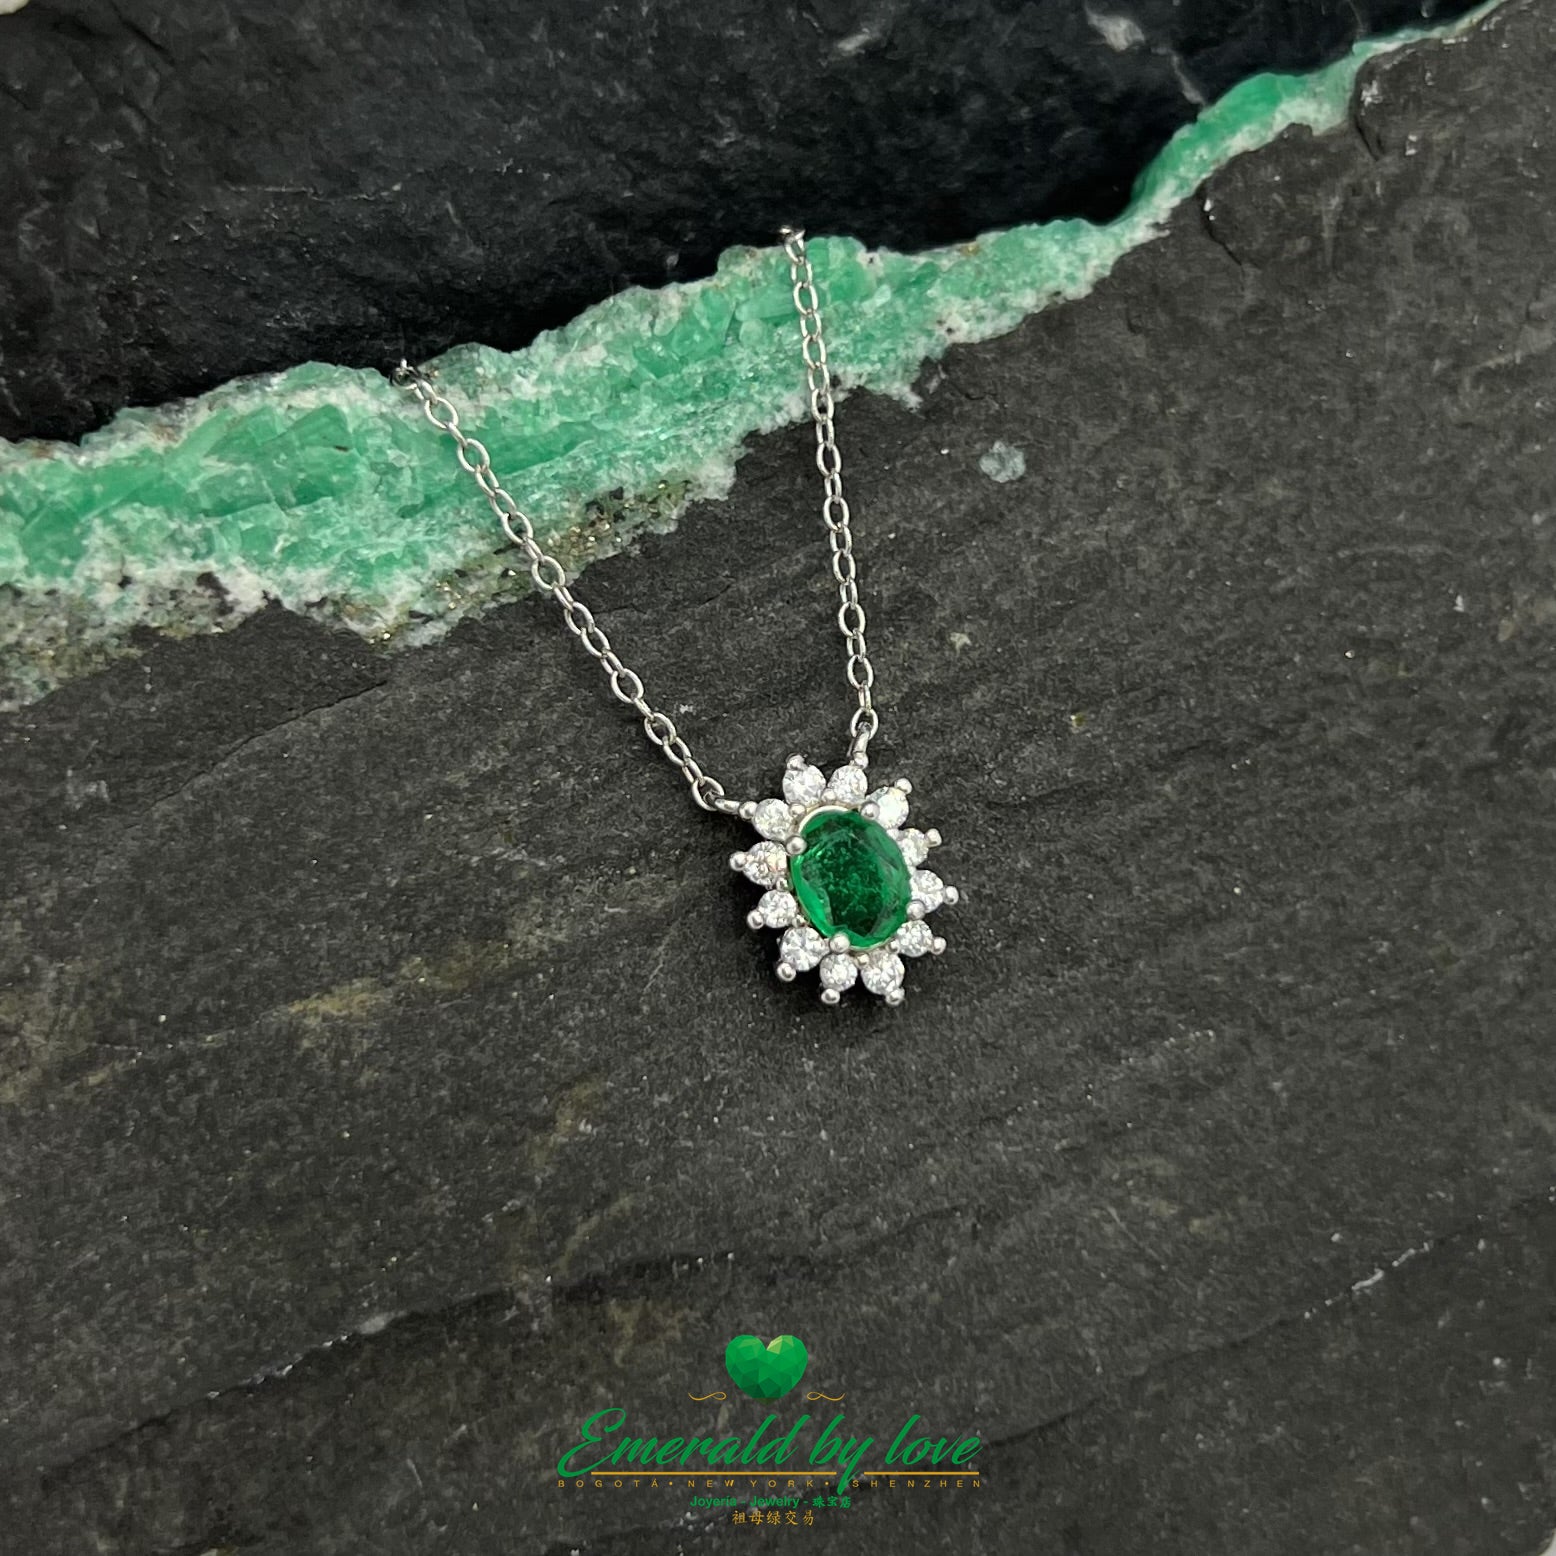 Elongated Flower Pendant with Oval Crystal Emerald